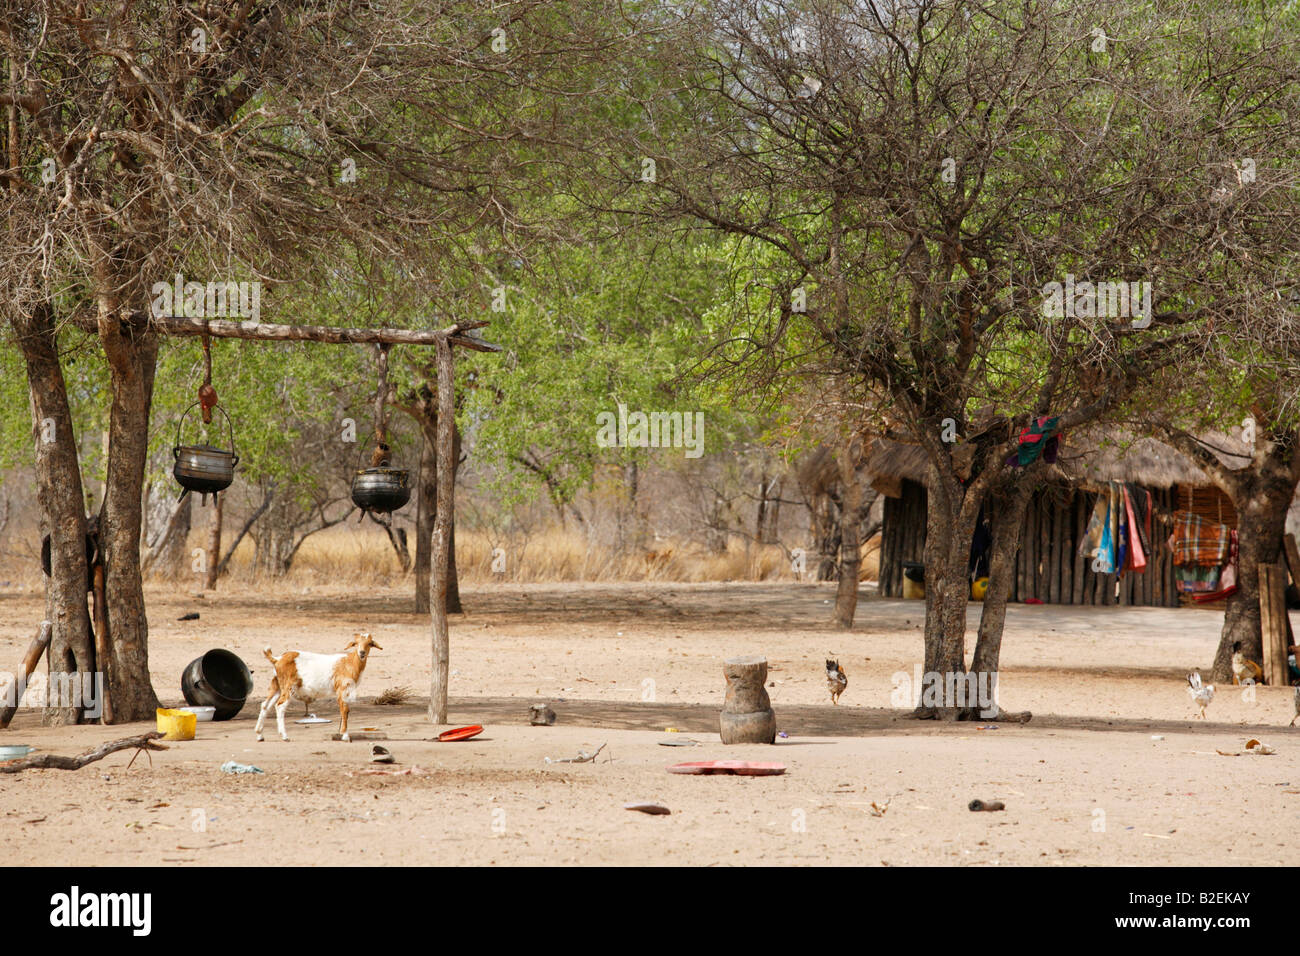 A settlement showing an outdoor cooking area with three-legged iron pots hanging from poles while not in use Stock Photo